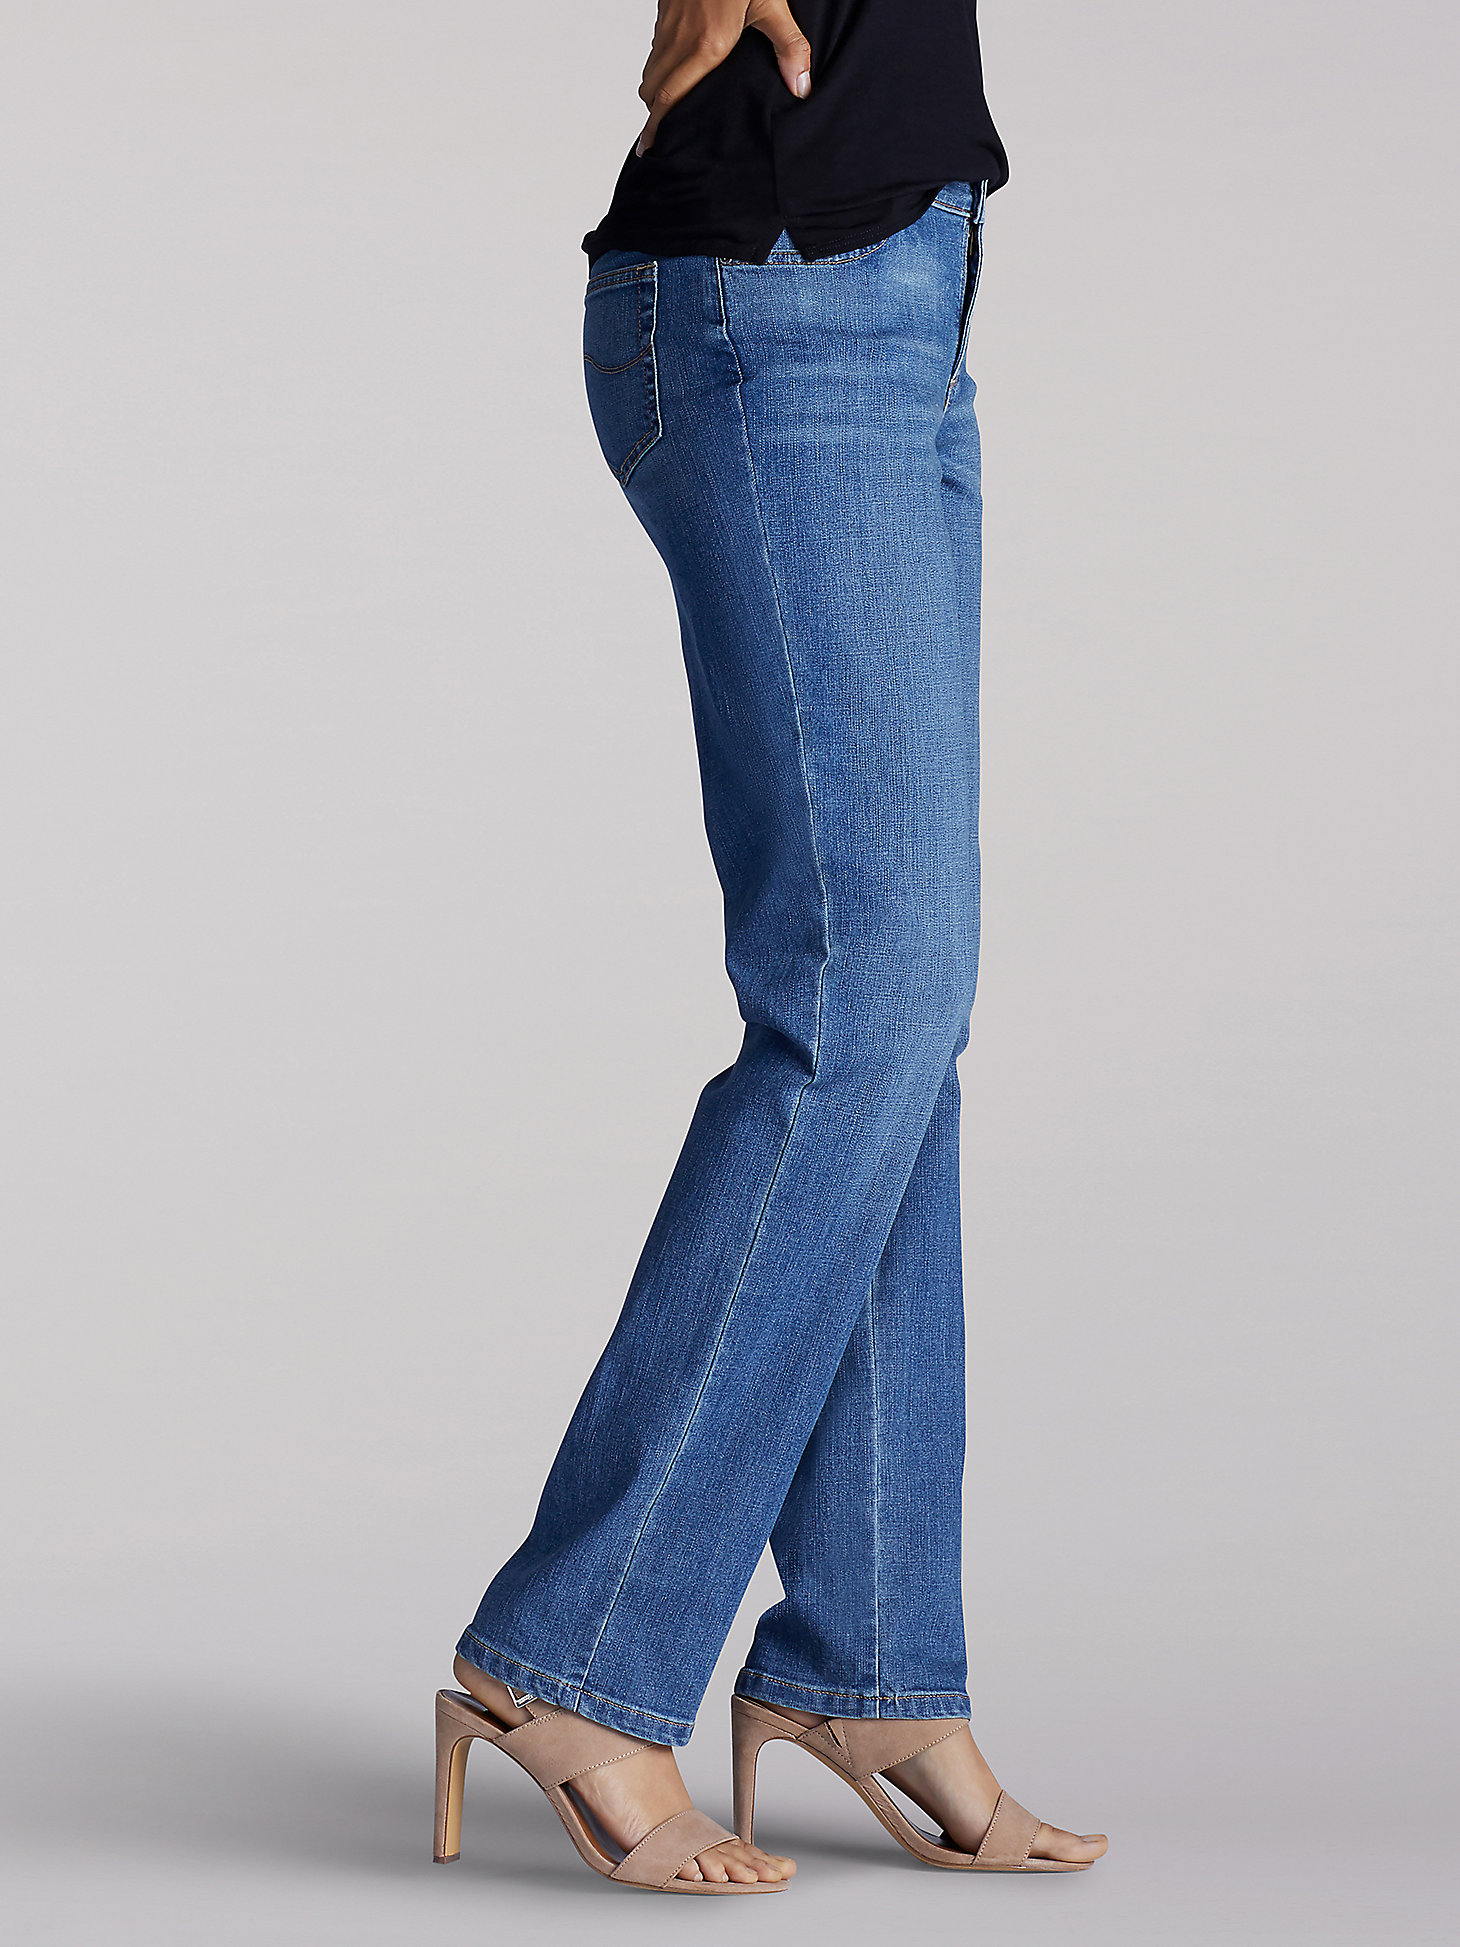 Women’s Stretch Relaxed Fit Straight Leg Jean (Petite) in Meridian alternative view 2